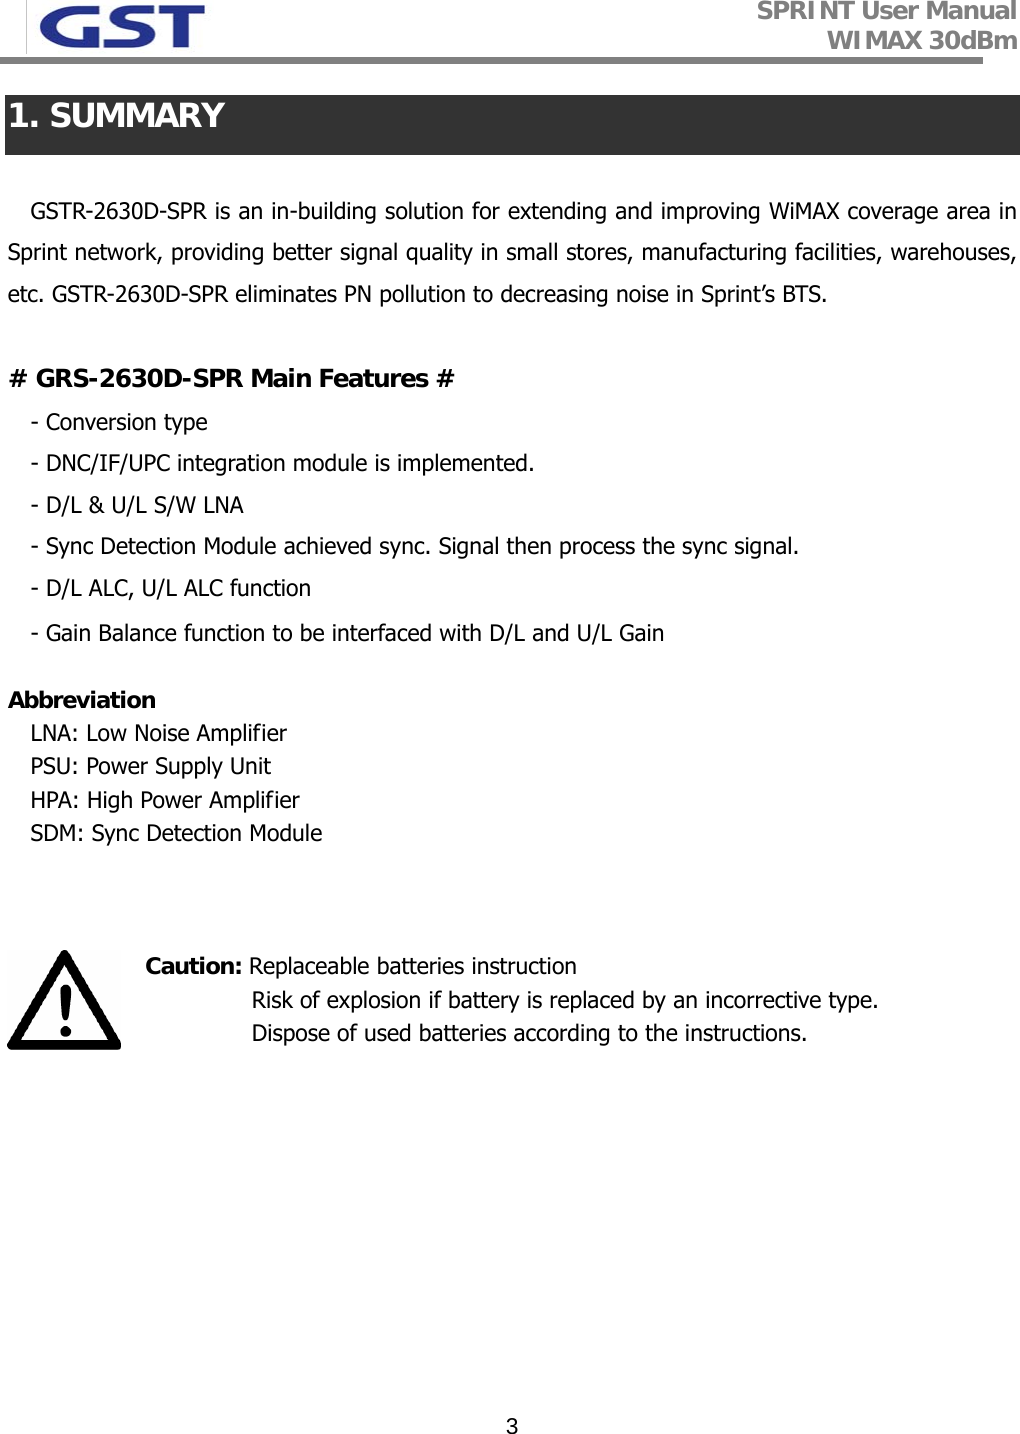 SPRINT User Manual WIMAX 30dBm   31. SUMMARY  GSTR-2630D-SPR is an in-building solution for extending and improving WiMAX coverage area in Sprint network, providing better signal quality in small stores, manufacturing facilities, warehouses, etc. GSTR-2630D-SPR eliminates PN pollution to decreasing noise in Sprint’s BTS.  # GRS-2630D-SPR Main Features # - Conversion type - DNC/IF/UPC integration module is implemented.  - D/L &amp; U/L S/W LNA - Sync Detection Module achieved sync. Signal then process the sync signal.  - D/L ALC, U/L ALC function - Gain Balance function to be interfaced with D/L and U/L Gain   Abbreviation  LNA: Low Noise Amplifier PSU: Power Supply Unit HPA: High Power Amplifier SDM: Sync Detection Module    Caution: Replaceable batteries instruction                                   Risk of explosion if battery is replaced by an incorrective type.                                   Dispose of used batteries according to the instructions.       